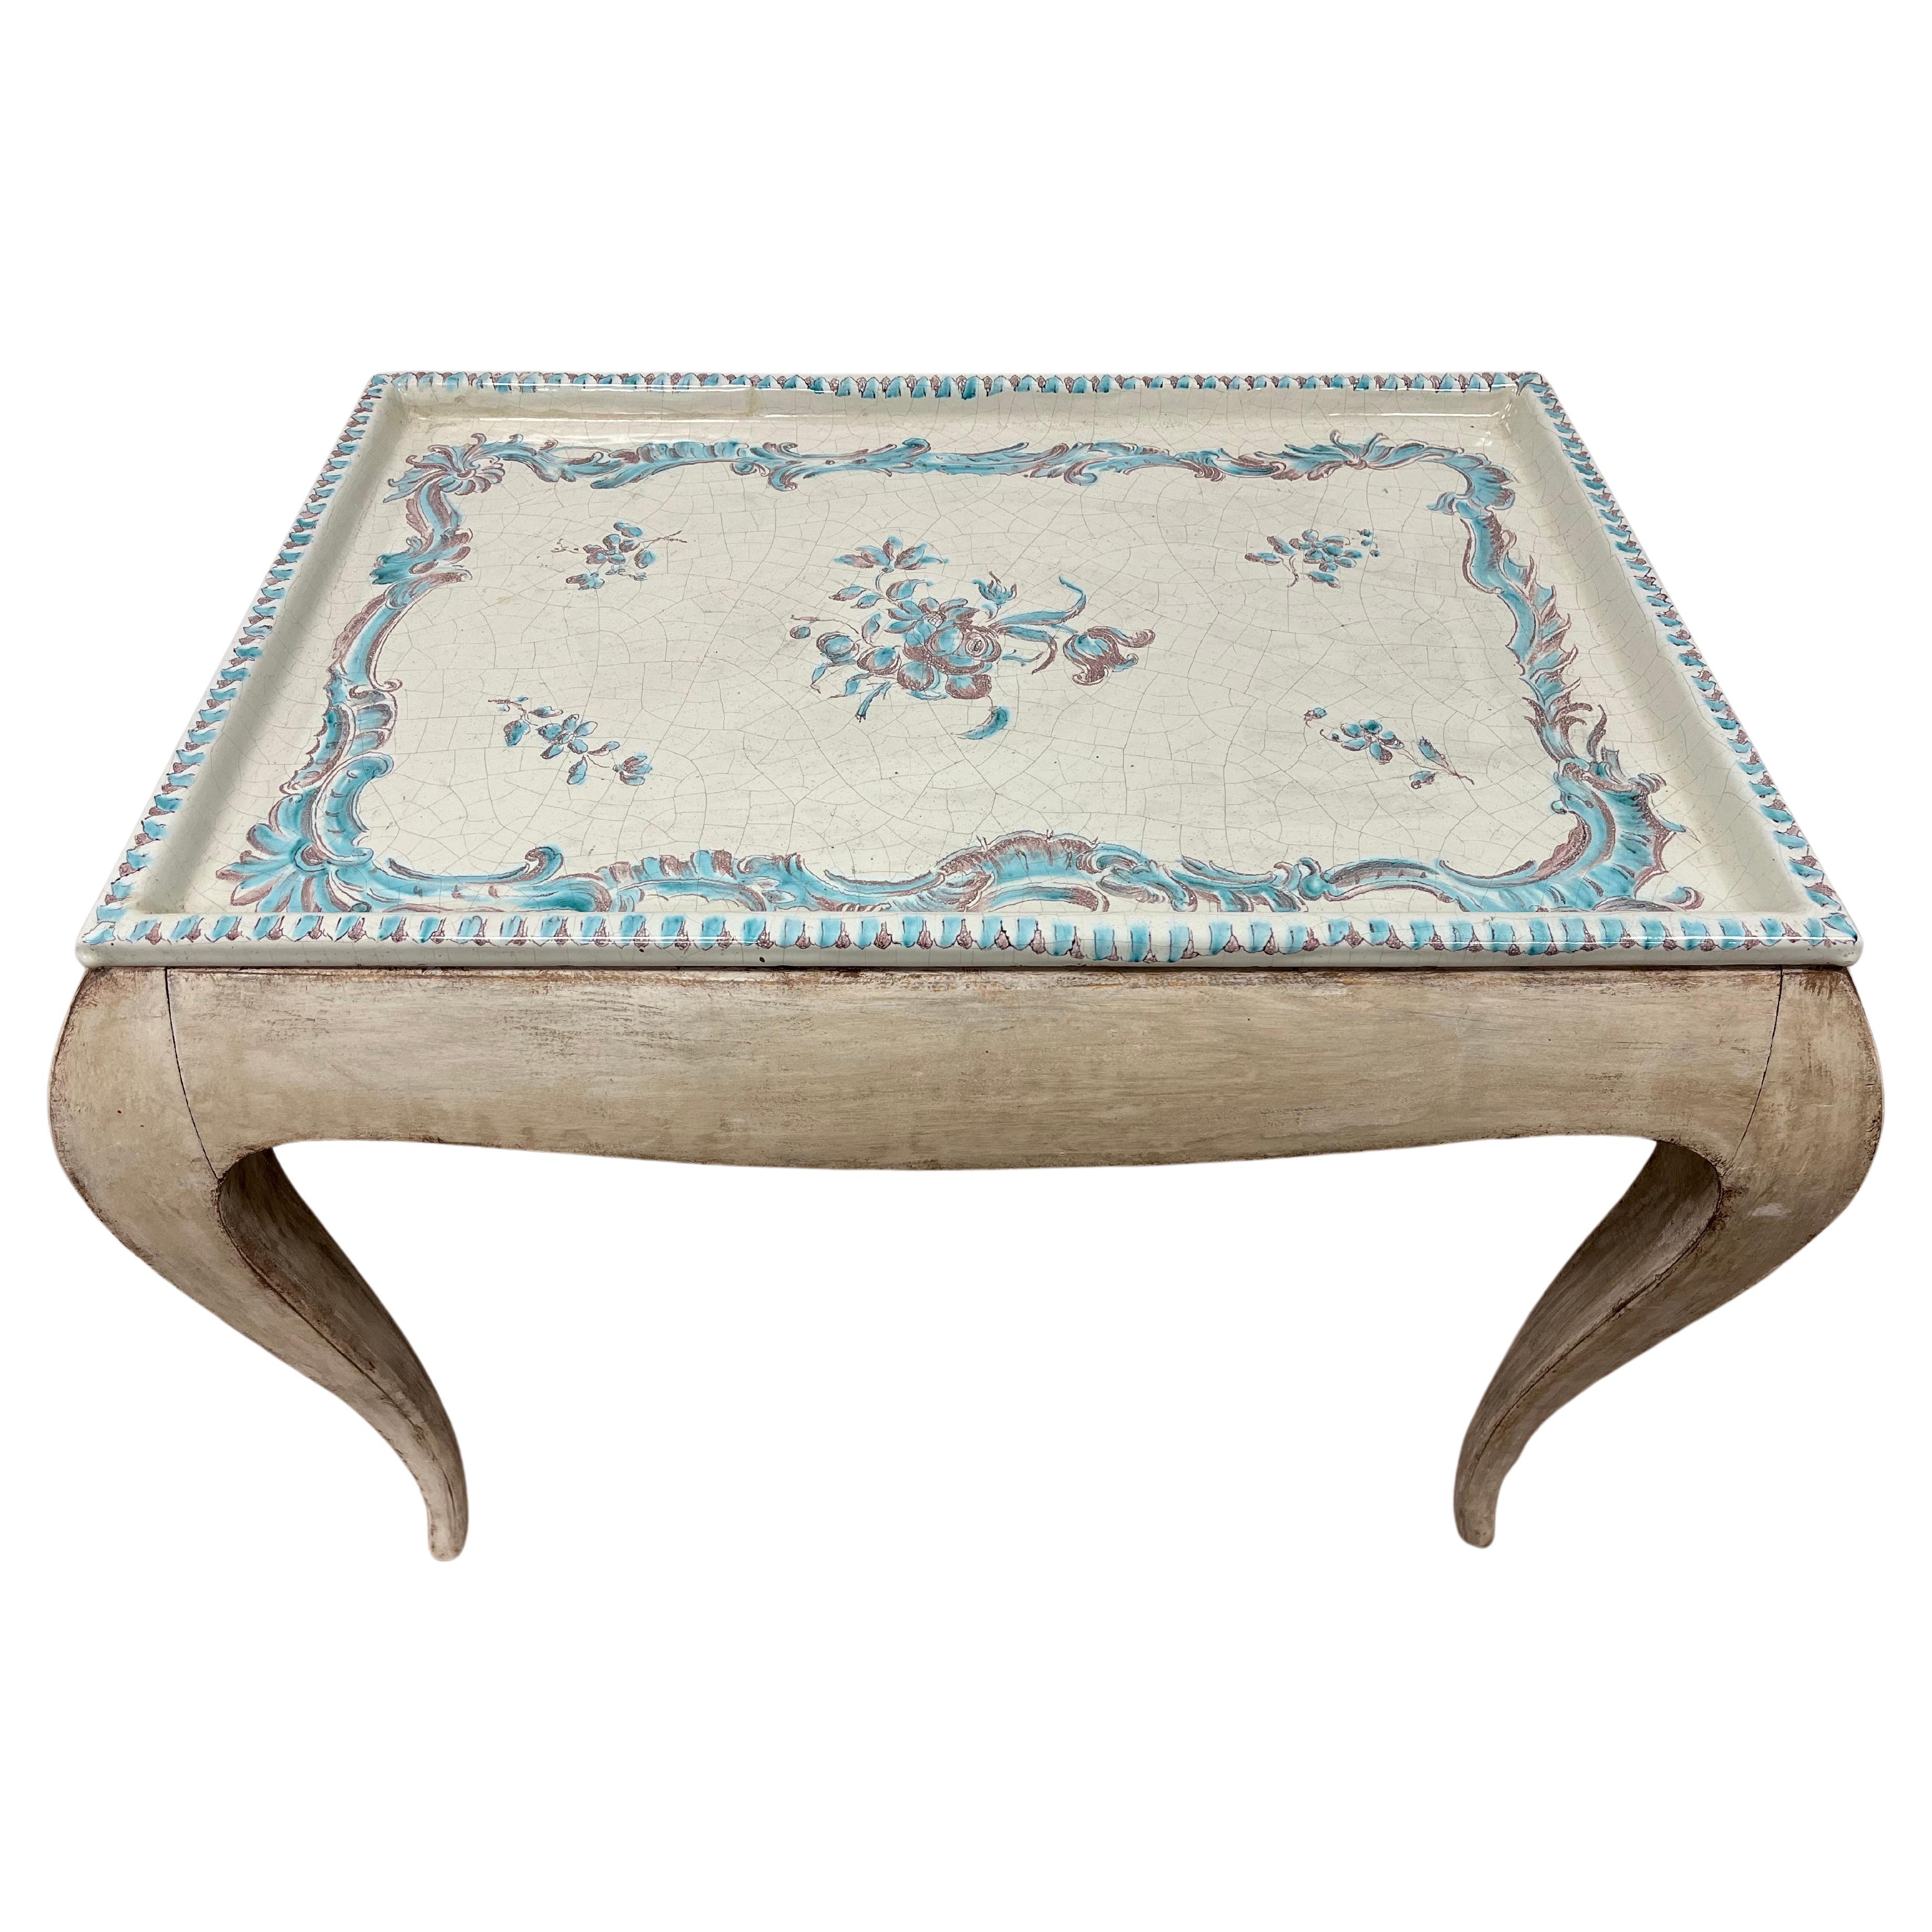 A Rococo style table with Upsala Ekeby porcelain tray top. Simple frame with cabriole legs In original cream paint.